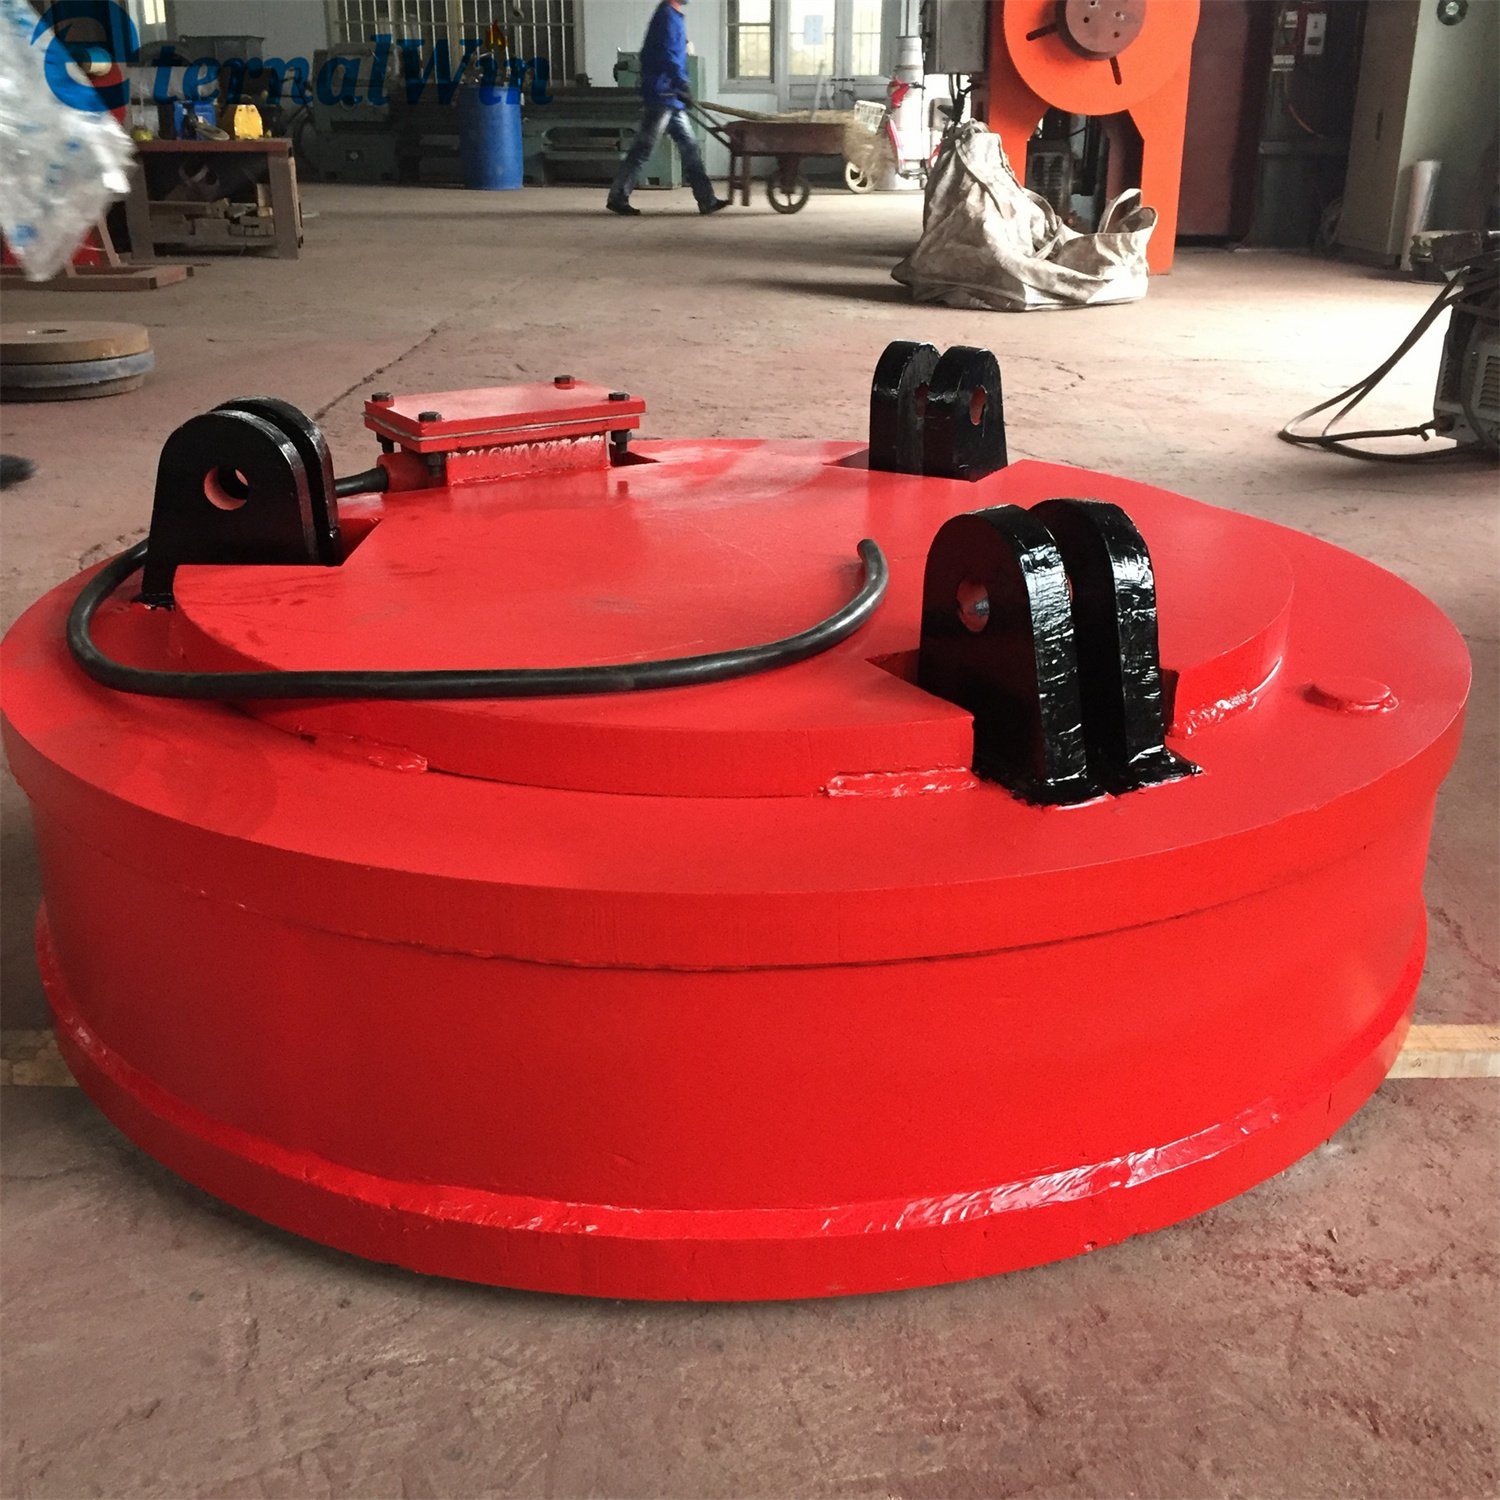 
                Overhead Electromagnetic Lifting Crane, Powerful Electromagnet Lifter Used for Crane
            